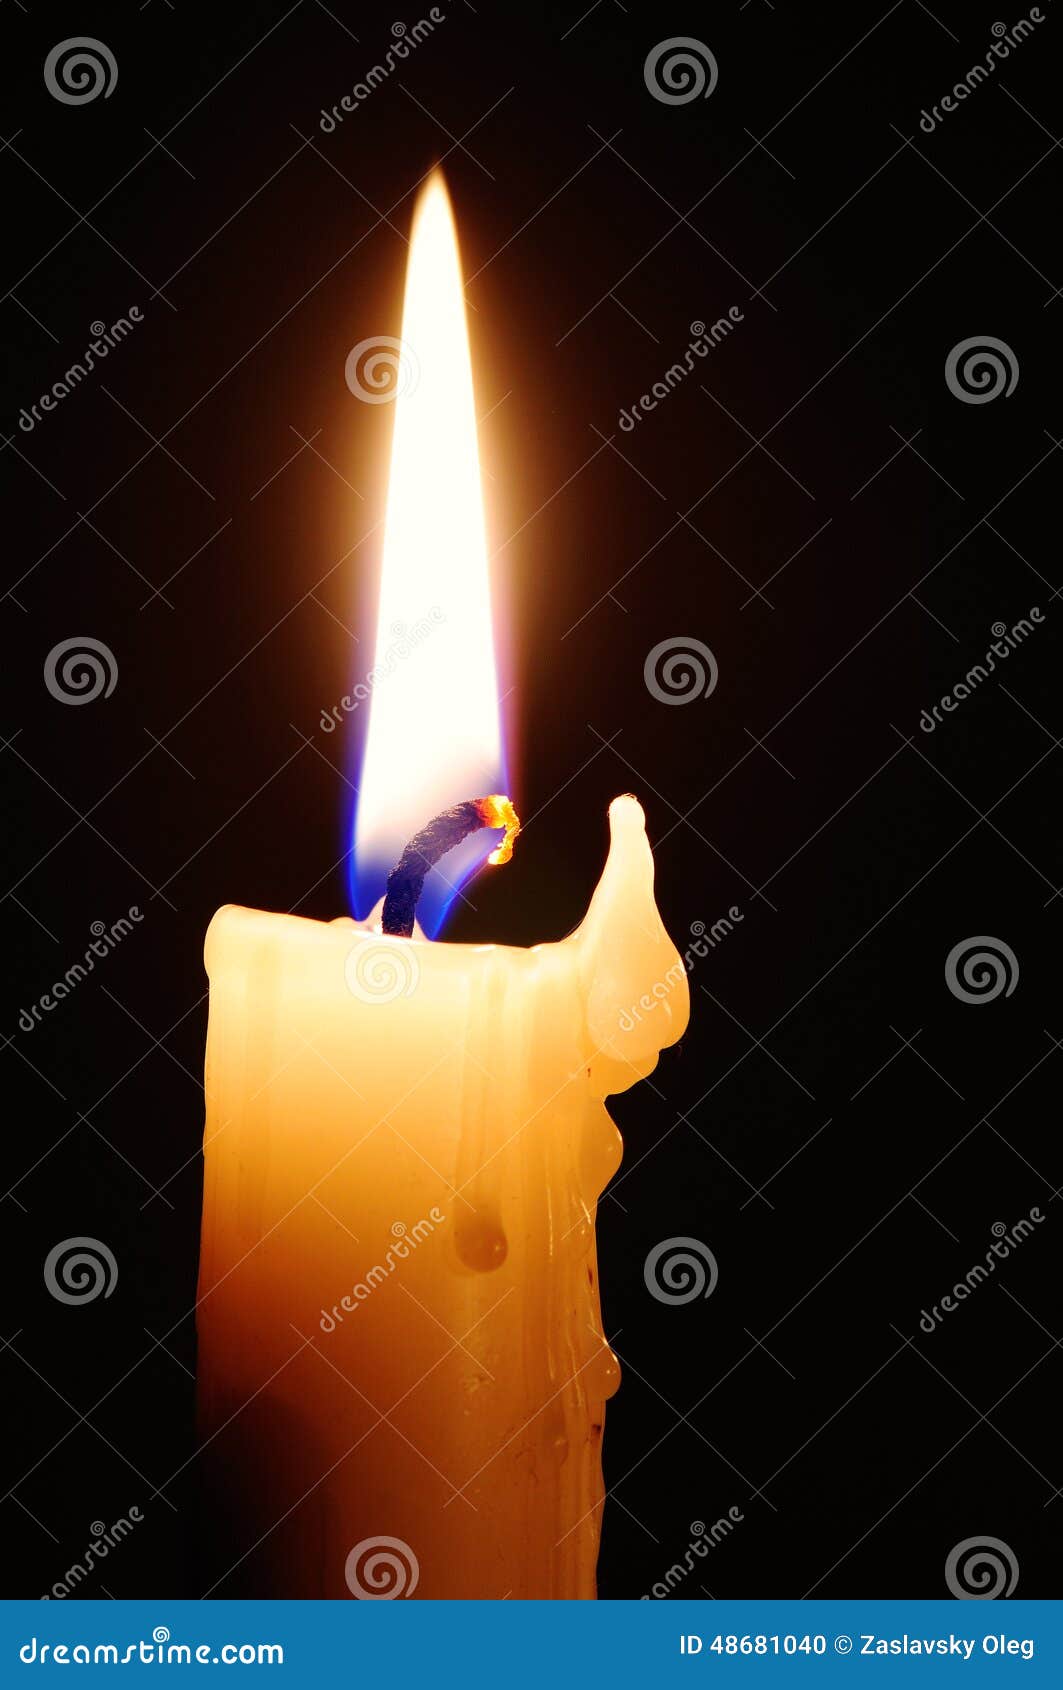 Melting Wax Candle in Hand · Free Stock Photo